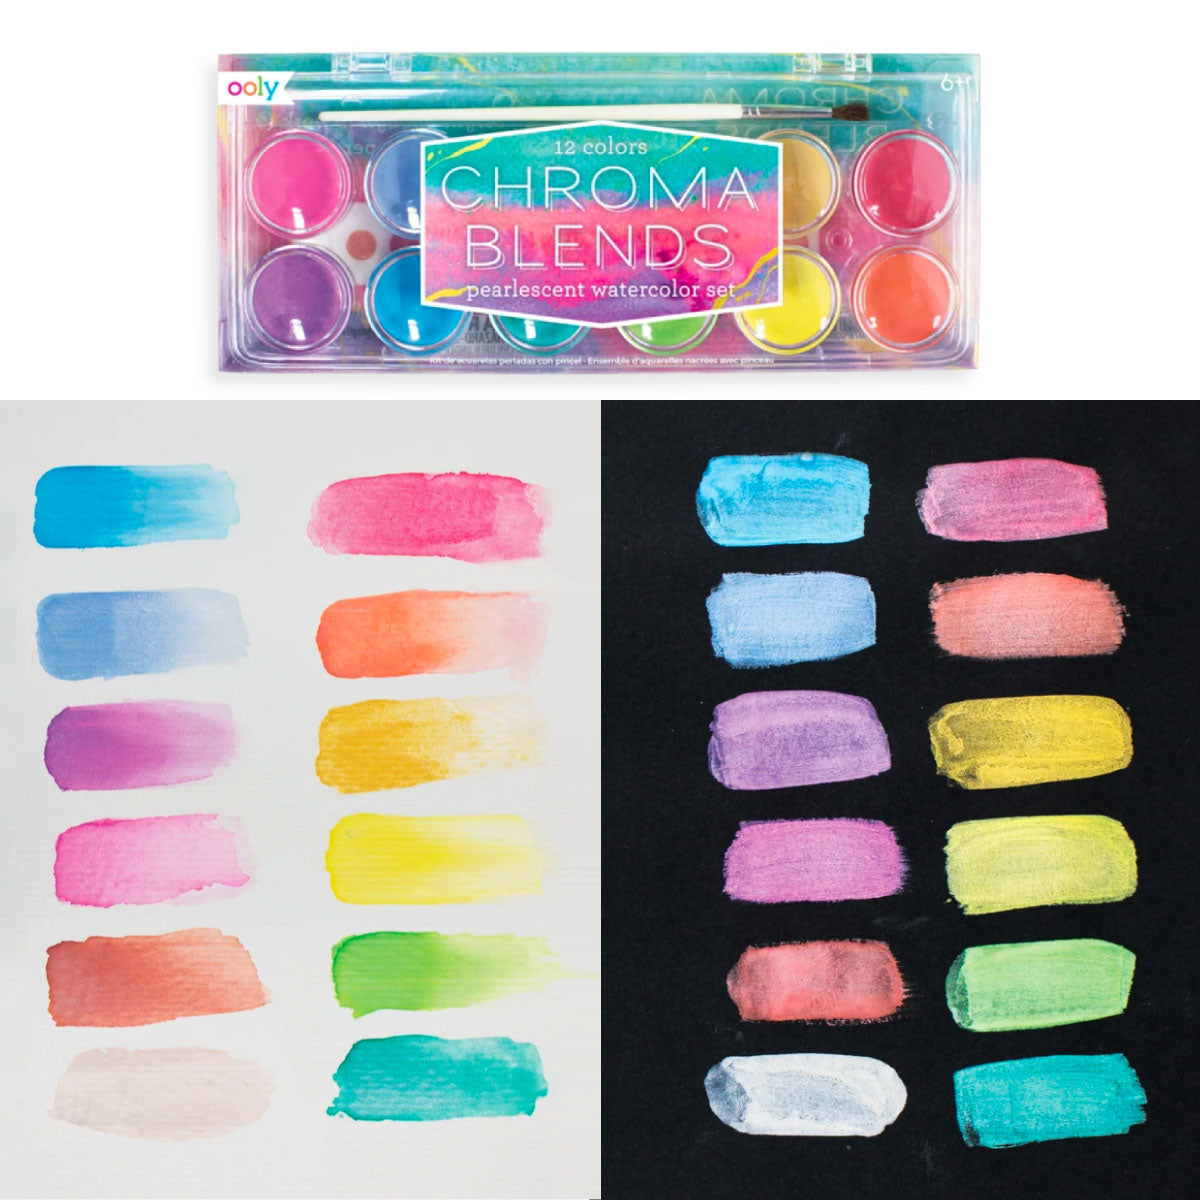 Chroma Blends Pearlescent Watercolor Paints from Ooly